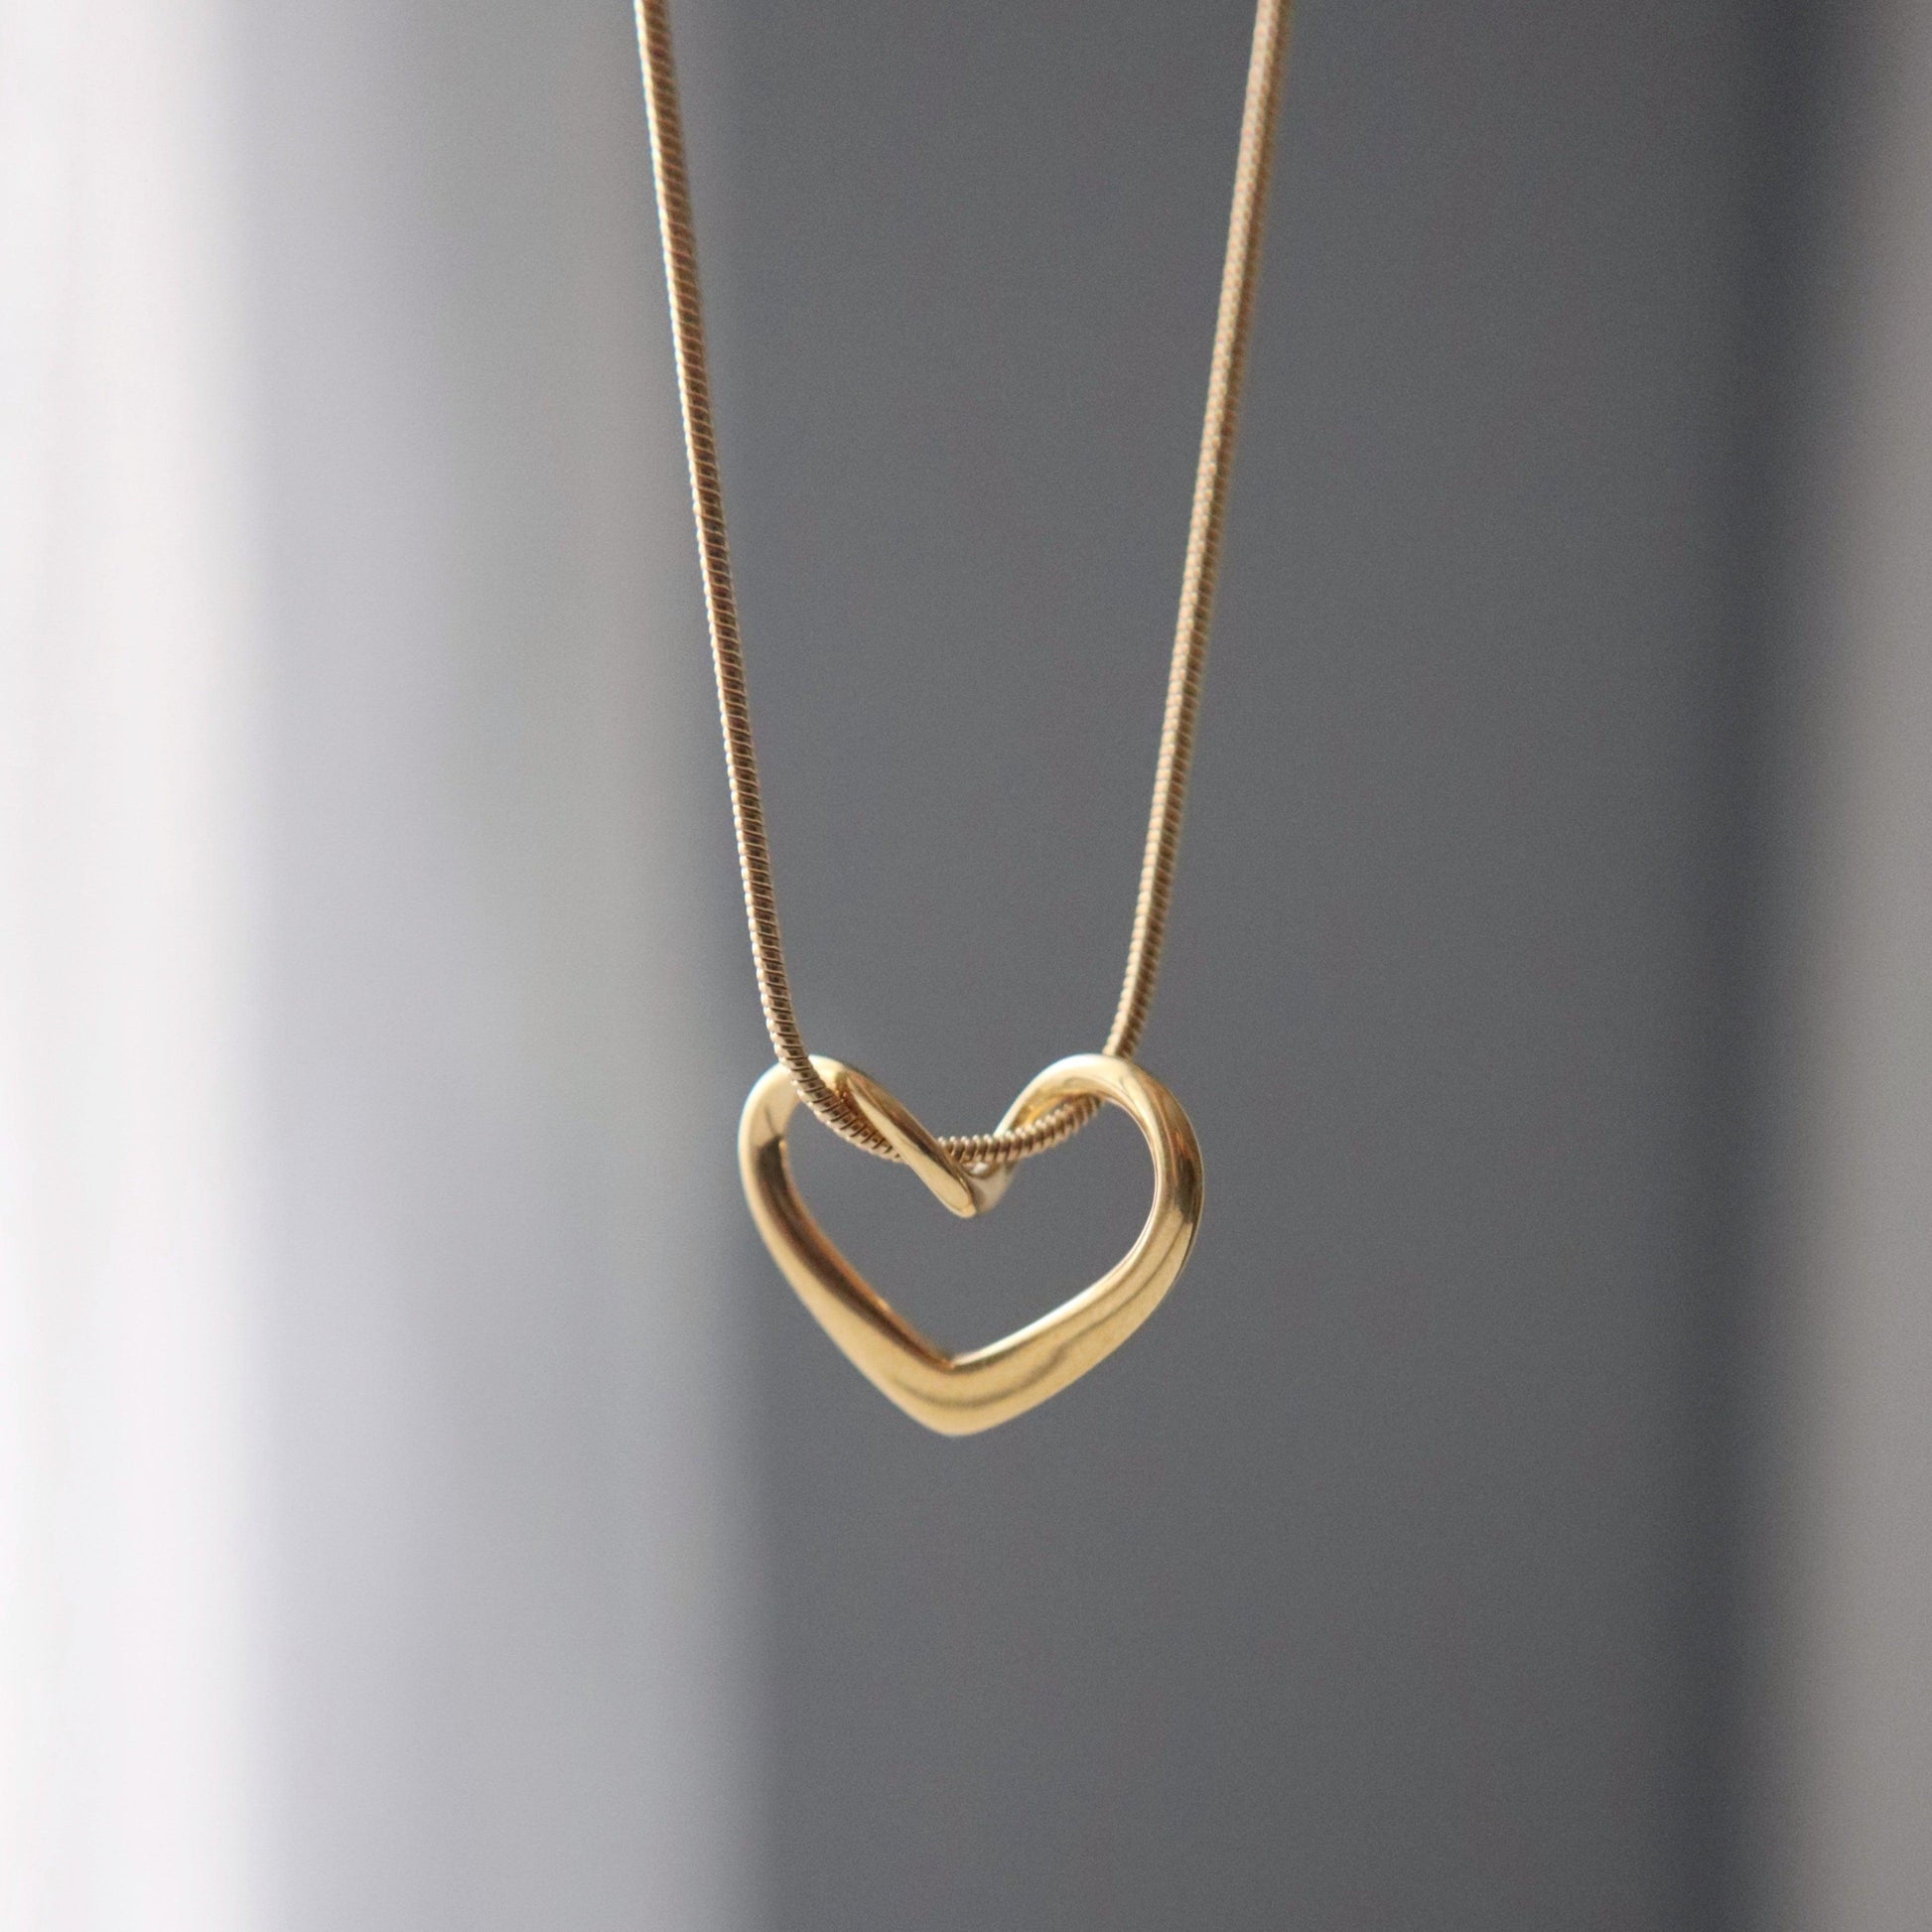 Heart Necklace - JESSA JEWELRY | GOLD JEWELRY; dainty, affordable gold everyday jewelry. Tarnish free, water-resistant, hypoallergenic. Jewelry for everyday wear